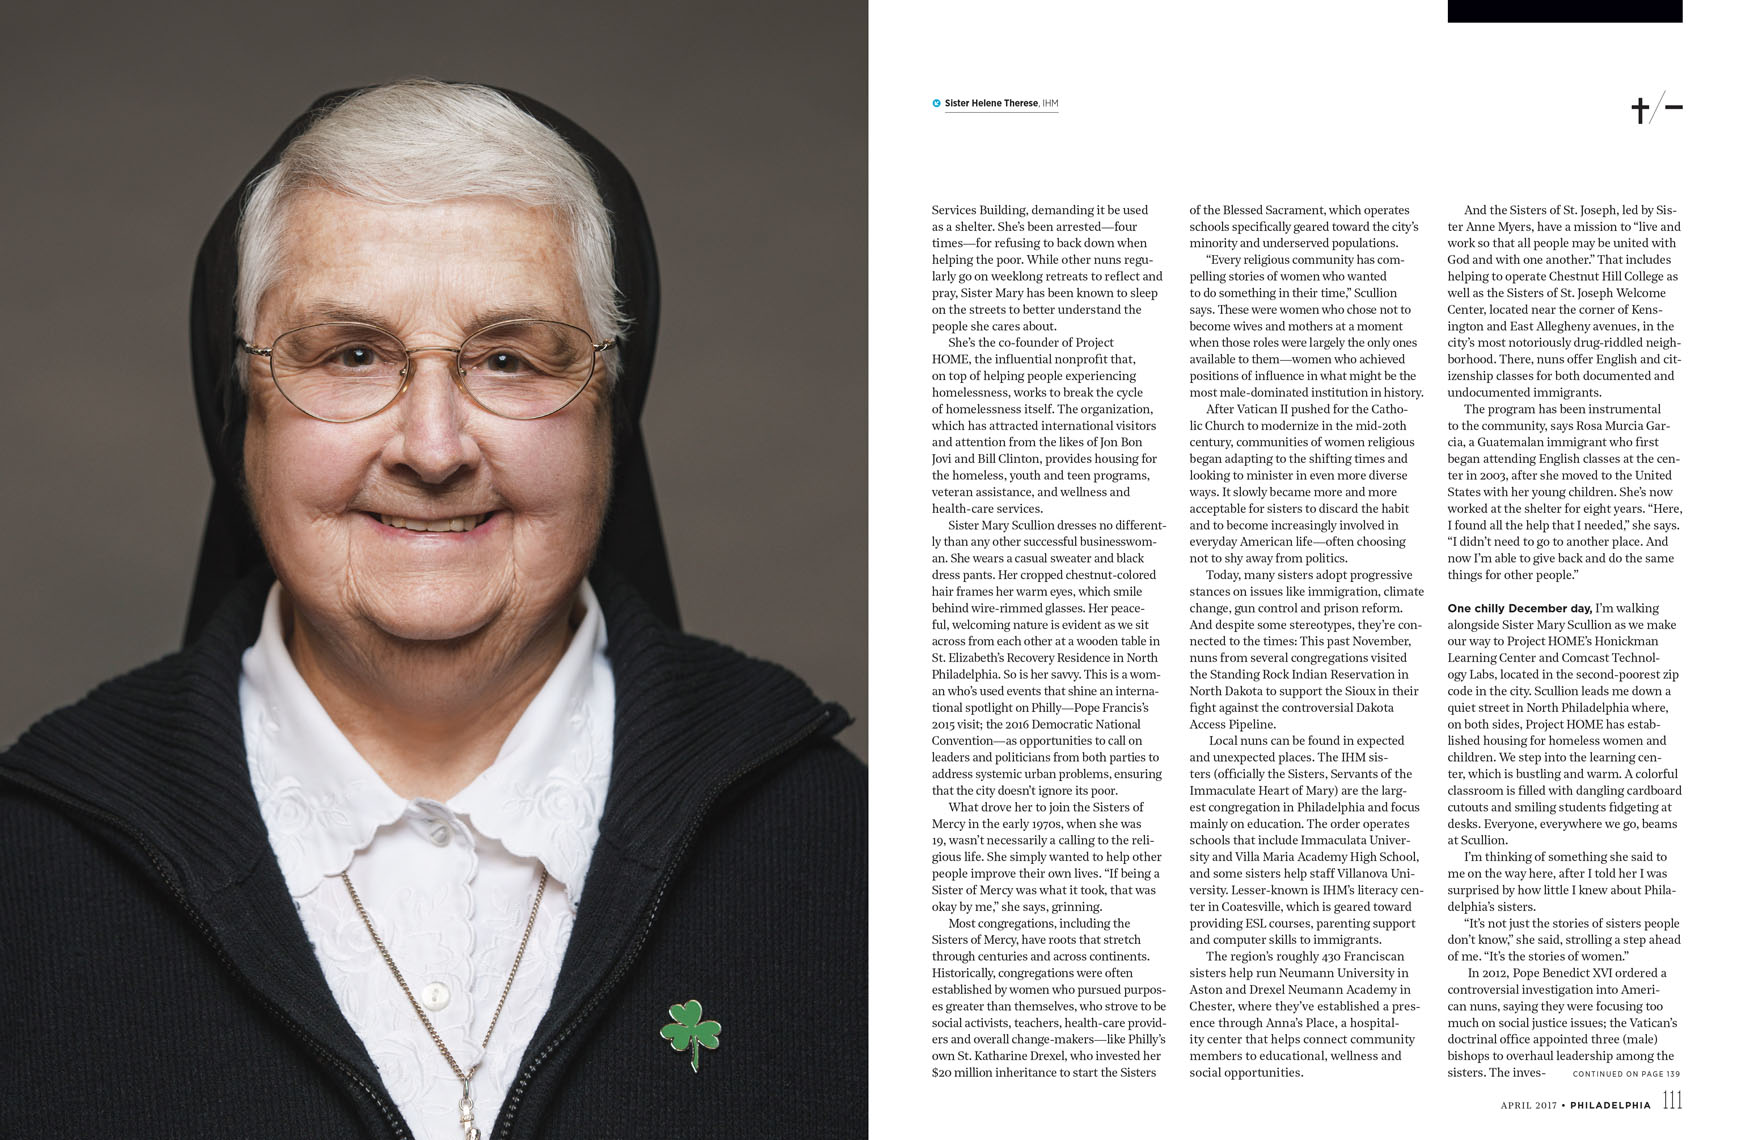 Philadelphia Magazine feature story about the Nuns of the city